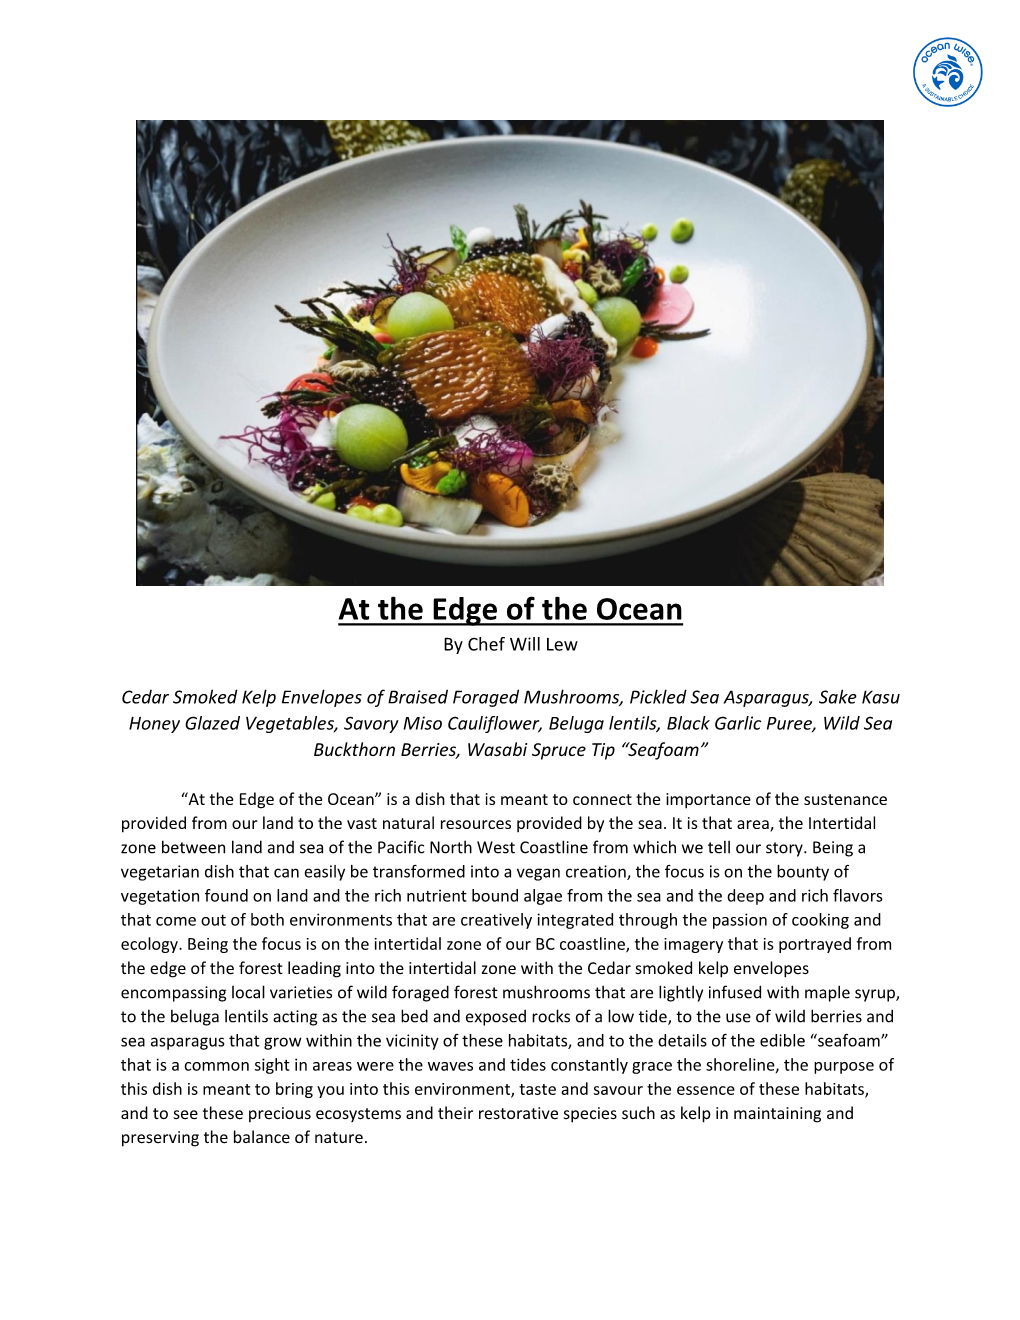 At the Edge of the Ocean Advanced Recipe